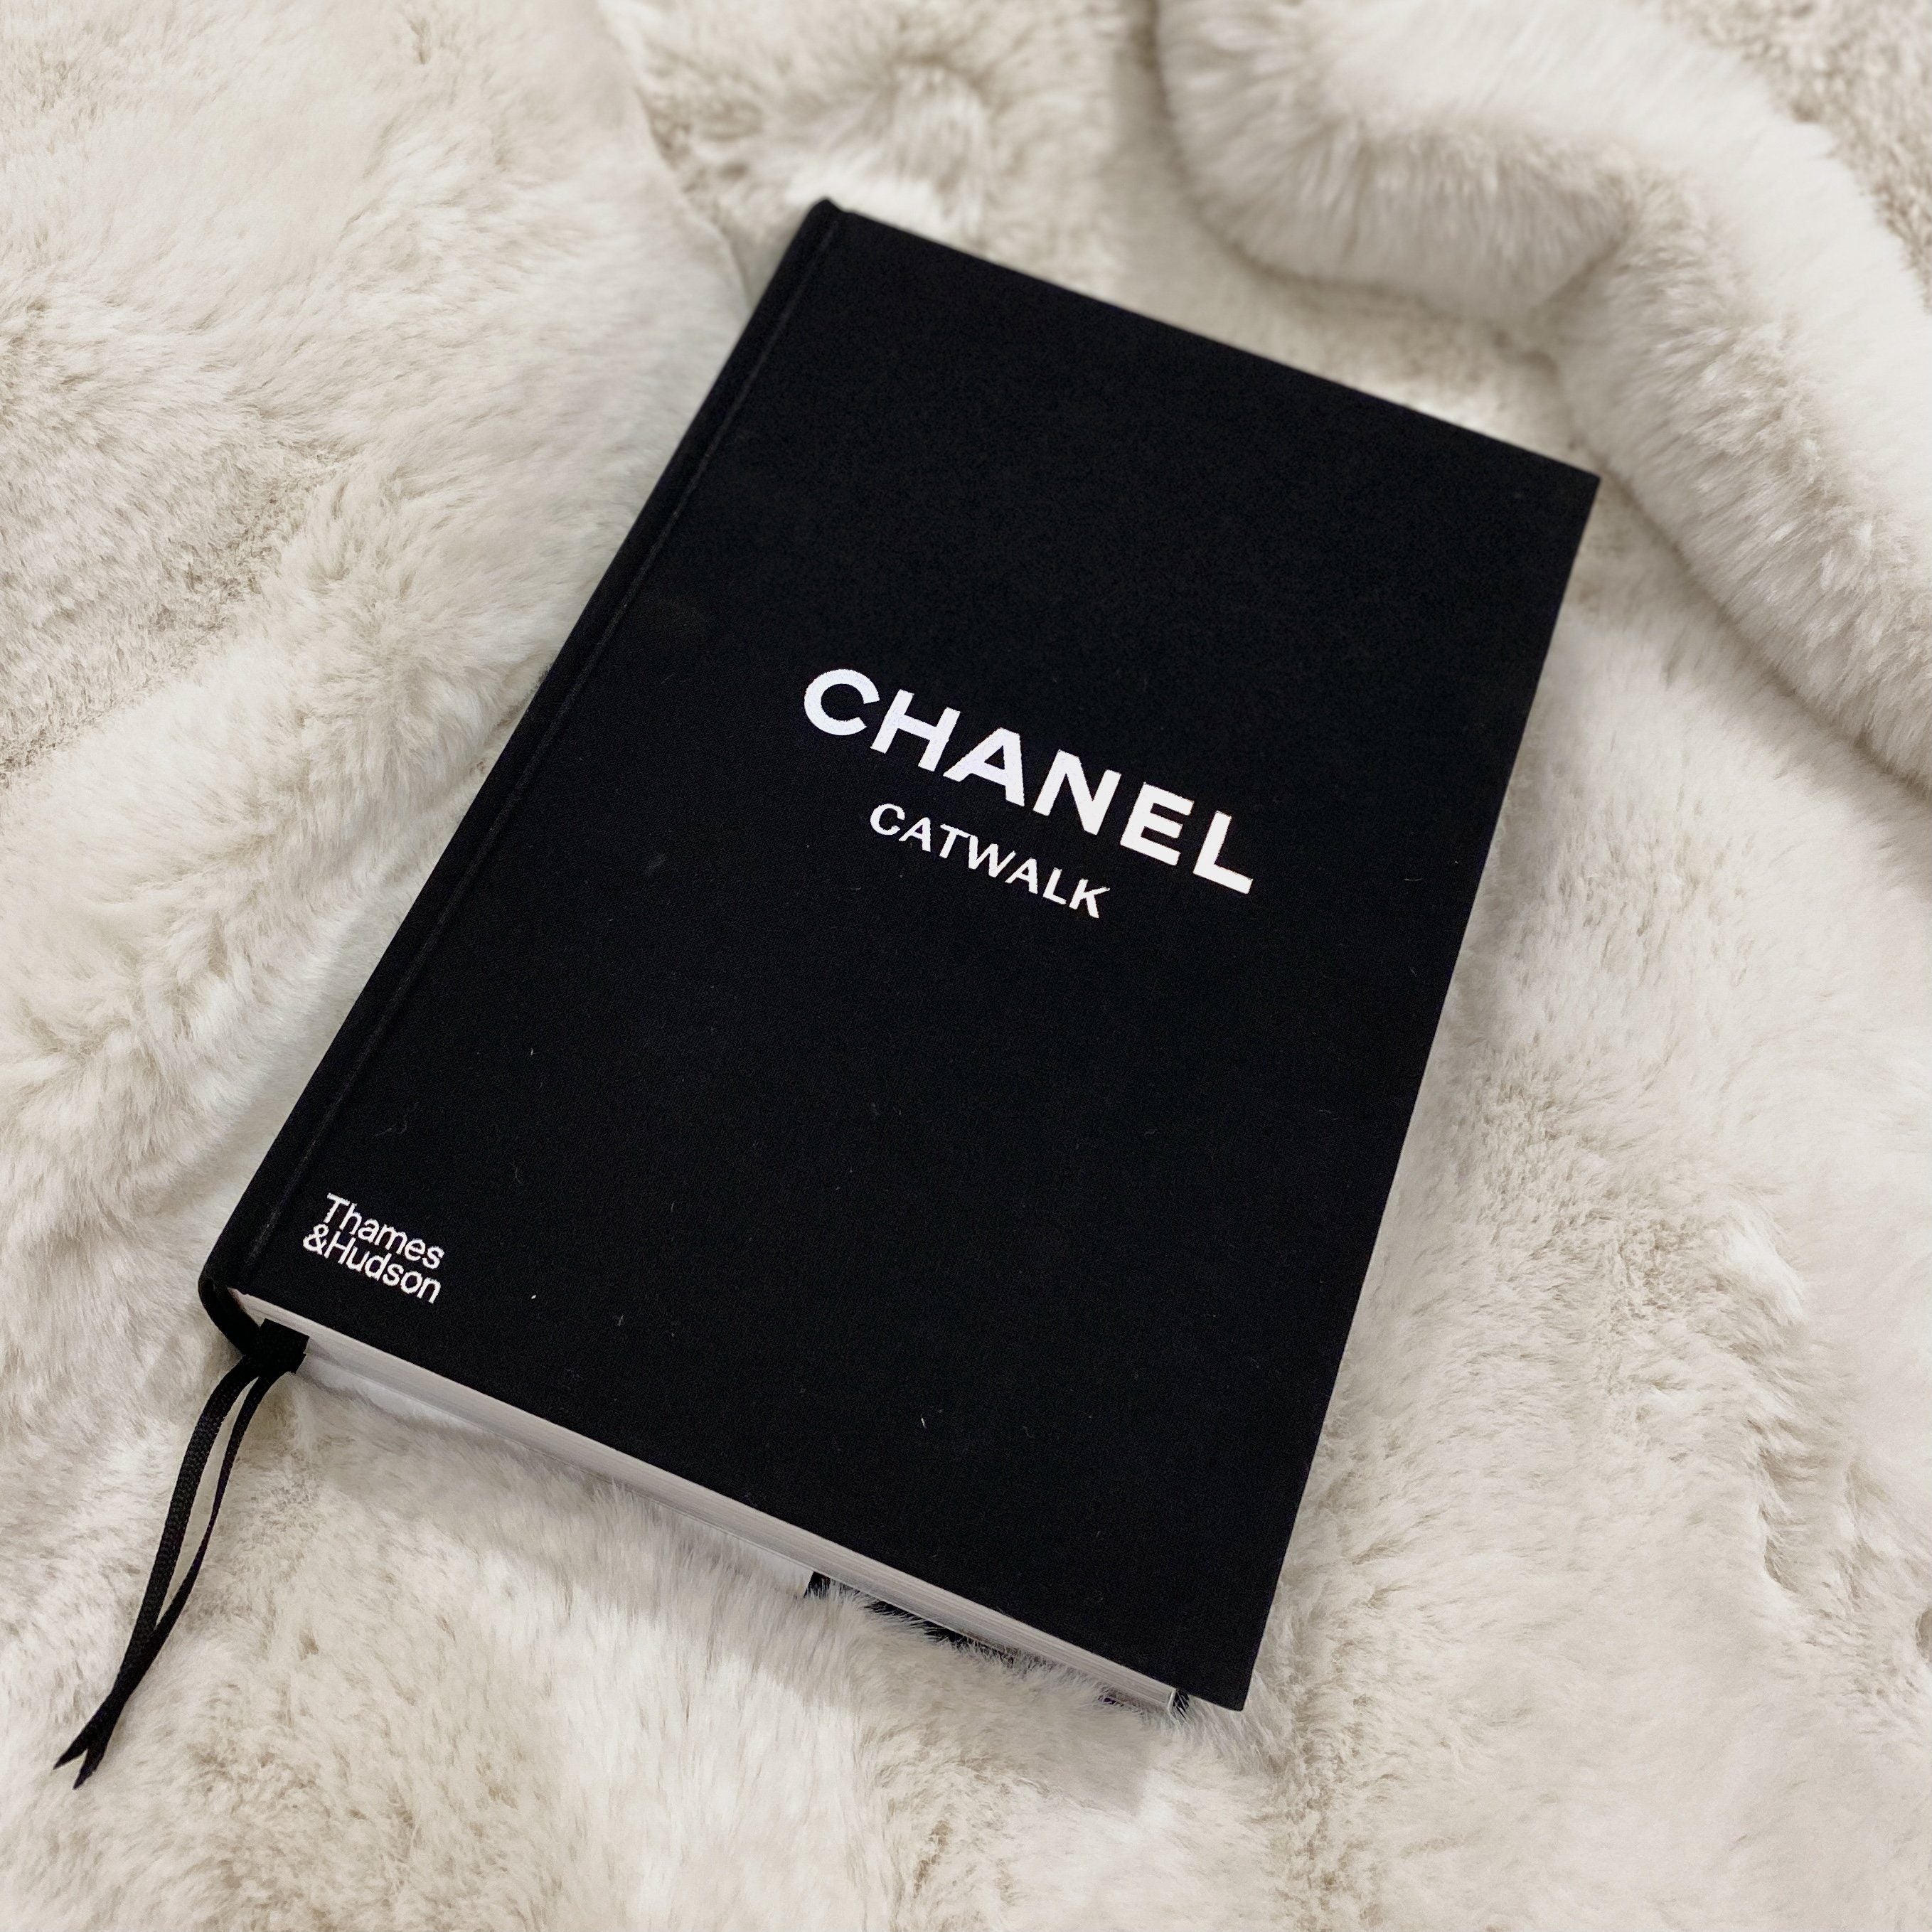 Chanel Catwalk Coffee Table Book - Home & Lifestyle from The Luxe Company UK